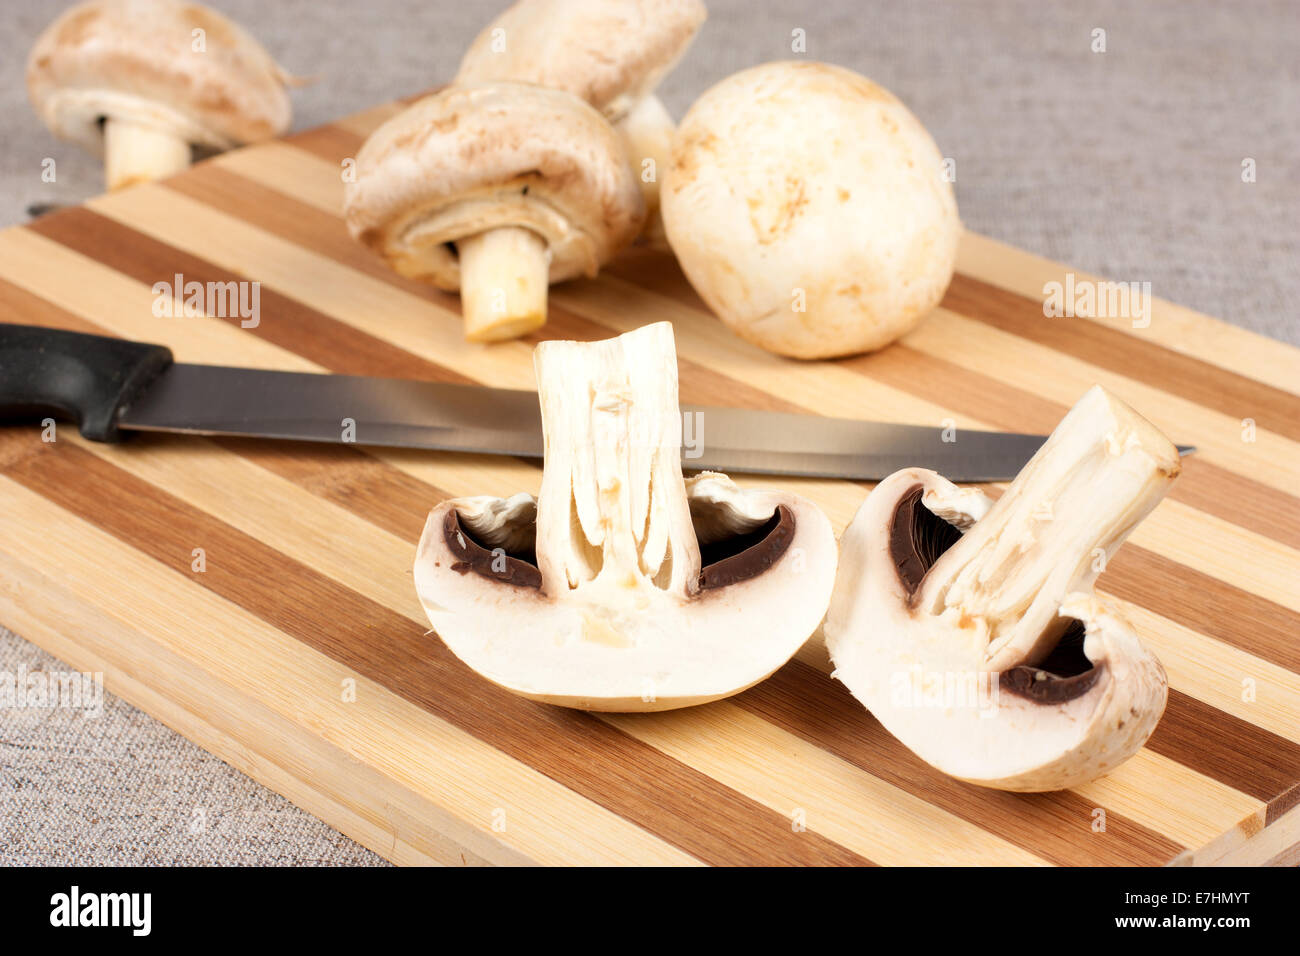 Mushrooms on a cutting board with a knife on a cutting board Stock Photo